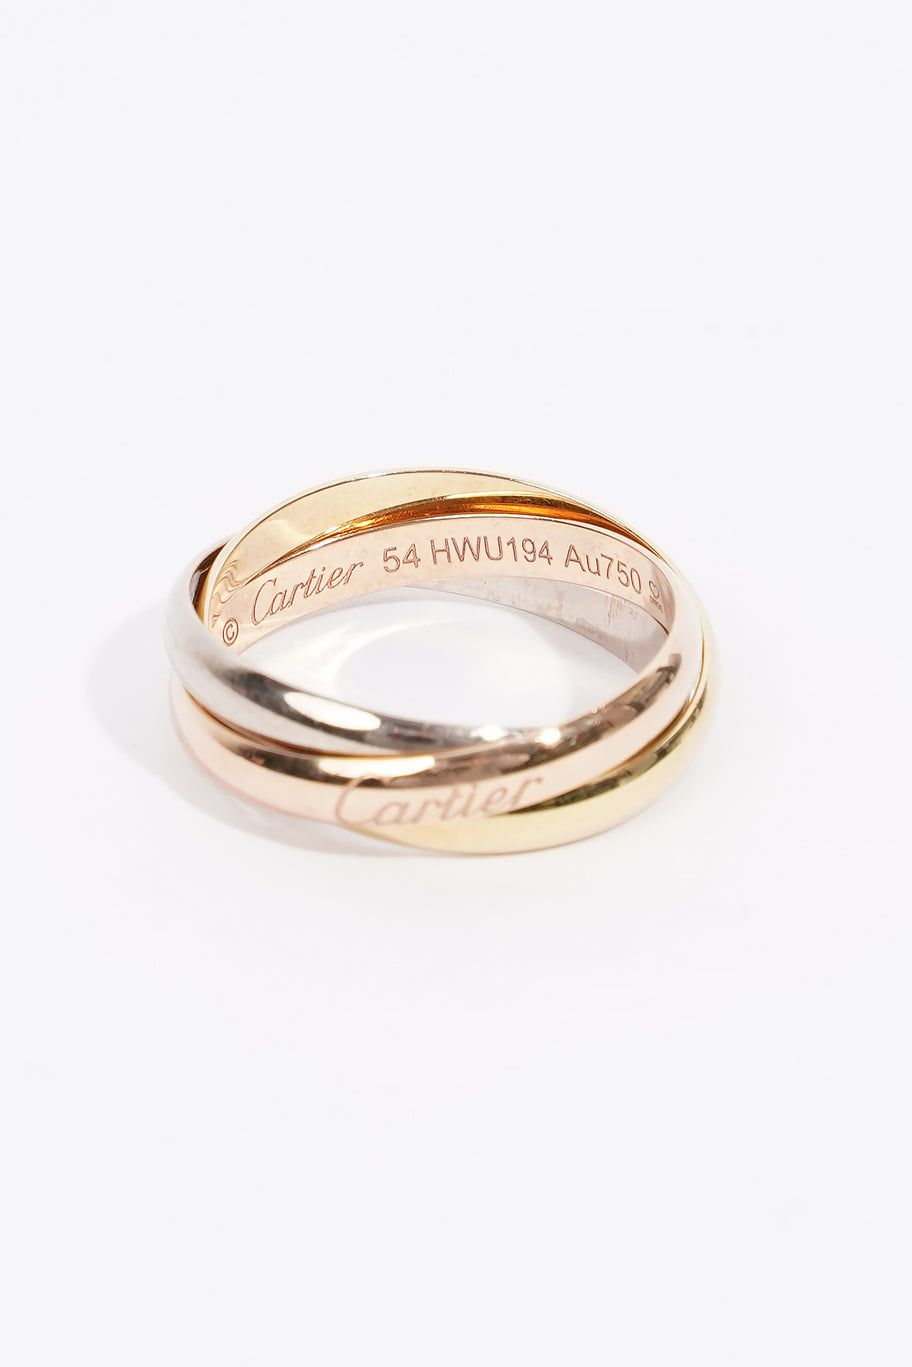 Trinity Ring, Small Model Rose Gold / White Gold Yellow Gold 54mm Image 3